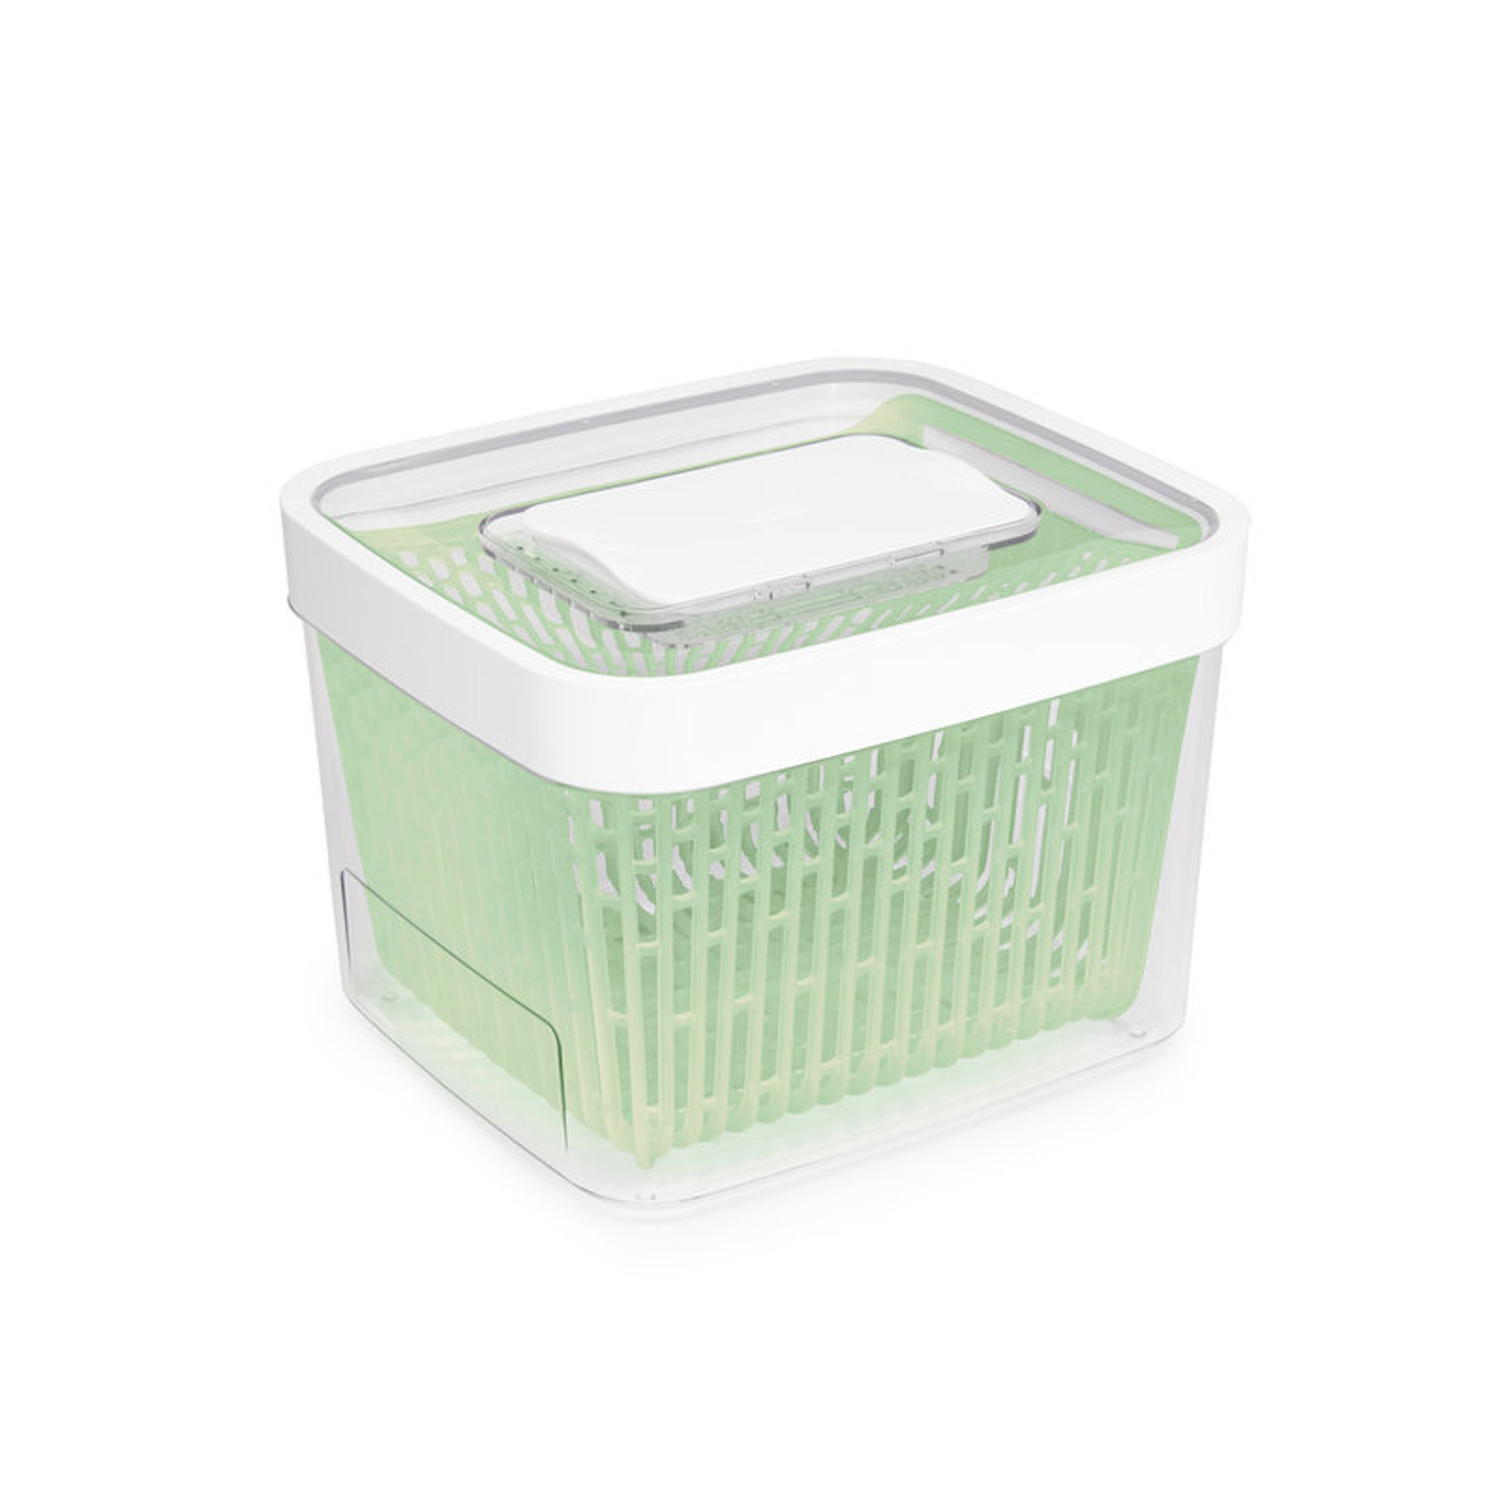 Photos - Other Accessories Oxo Good Grips 4.3 qt Clear/Green Produce Keeper 1 pk 11140000 